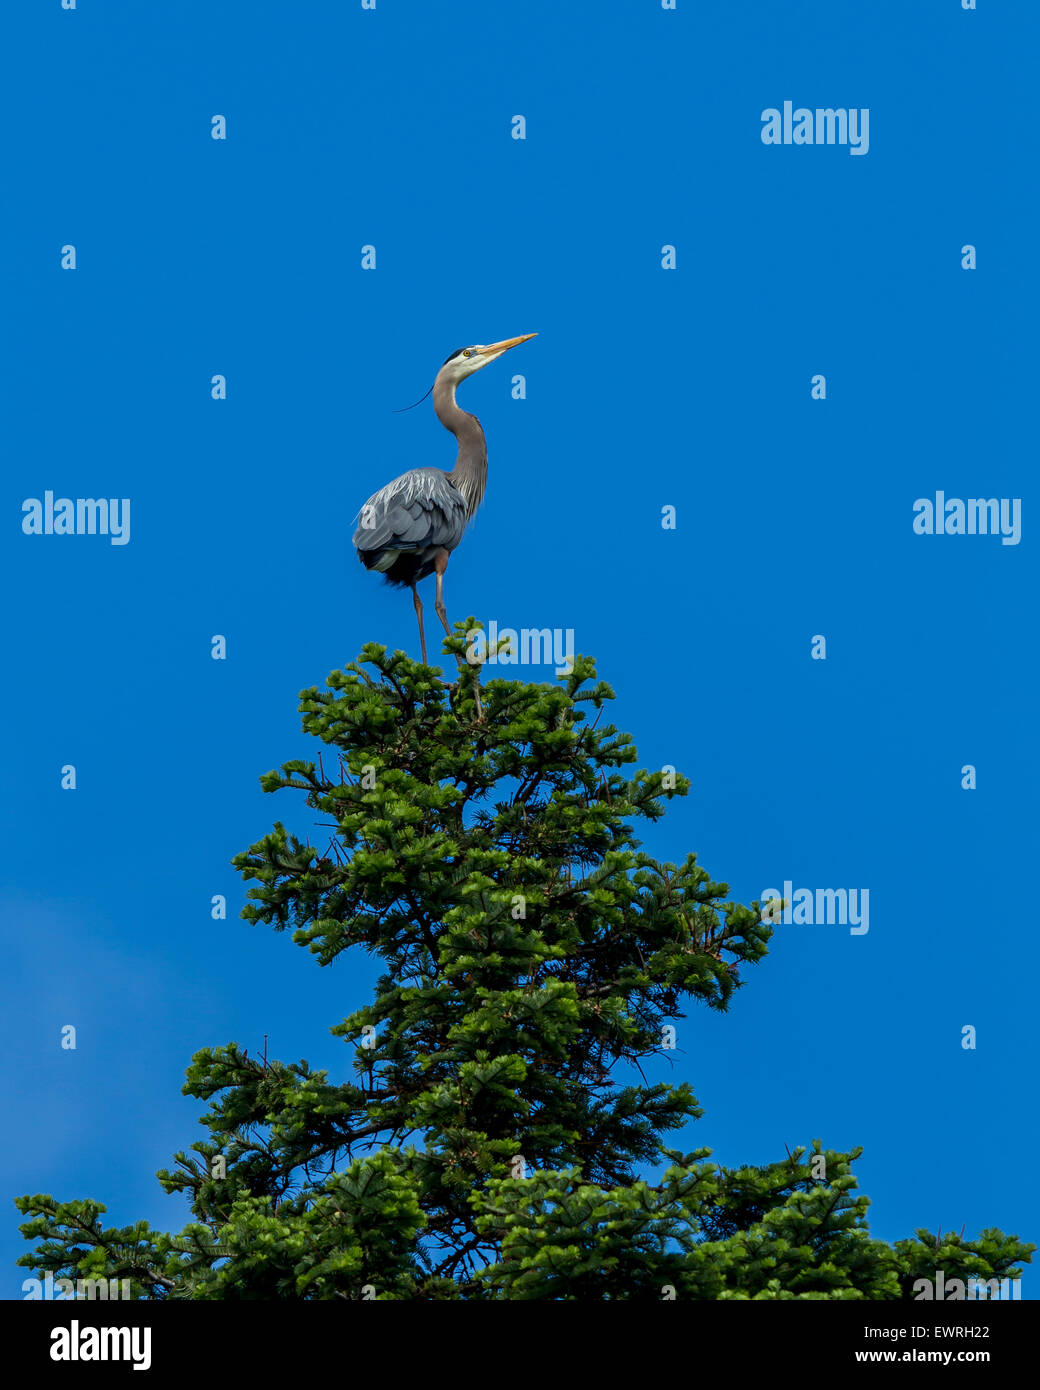 Heron perched on tree. Stock Photo